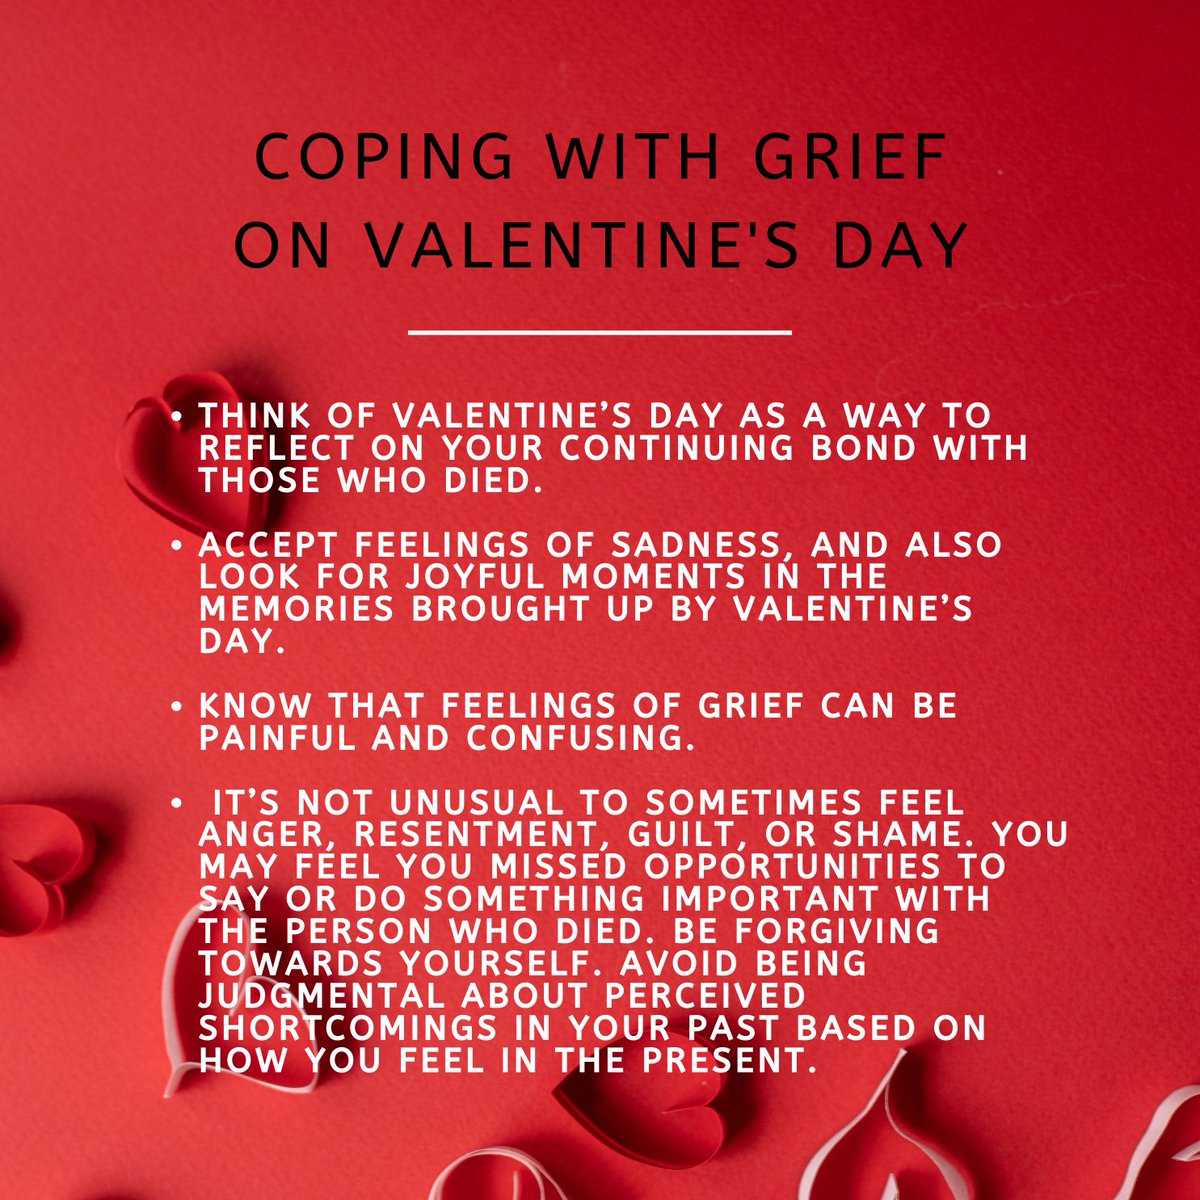 Struggling on #ValentinesDay? We've got your back. Our guidance document offers support & resources for educators to help grieving students. Check it out now & show your students you care, grievingstudents.org/wp-content/upl….